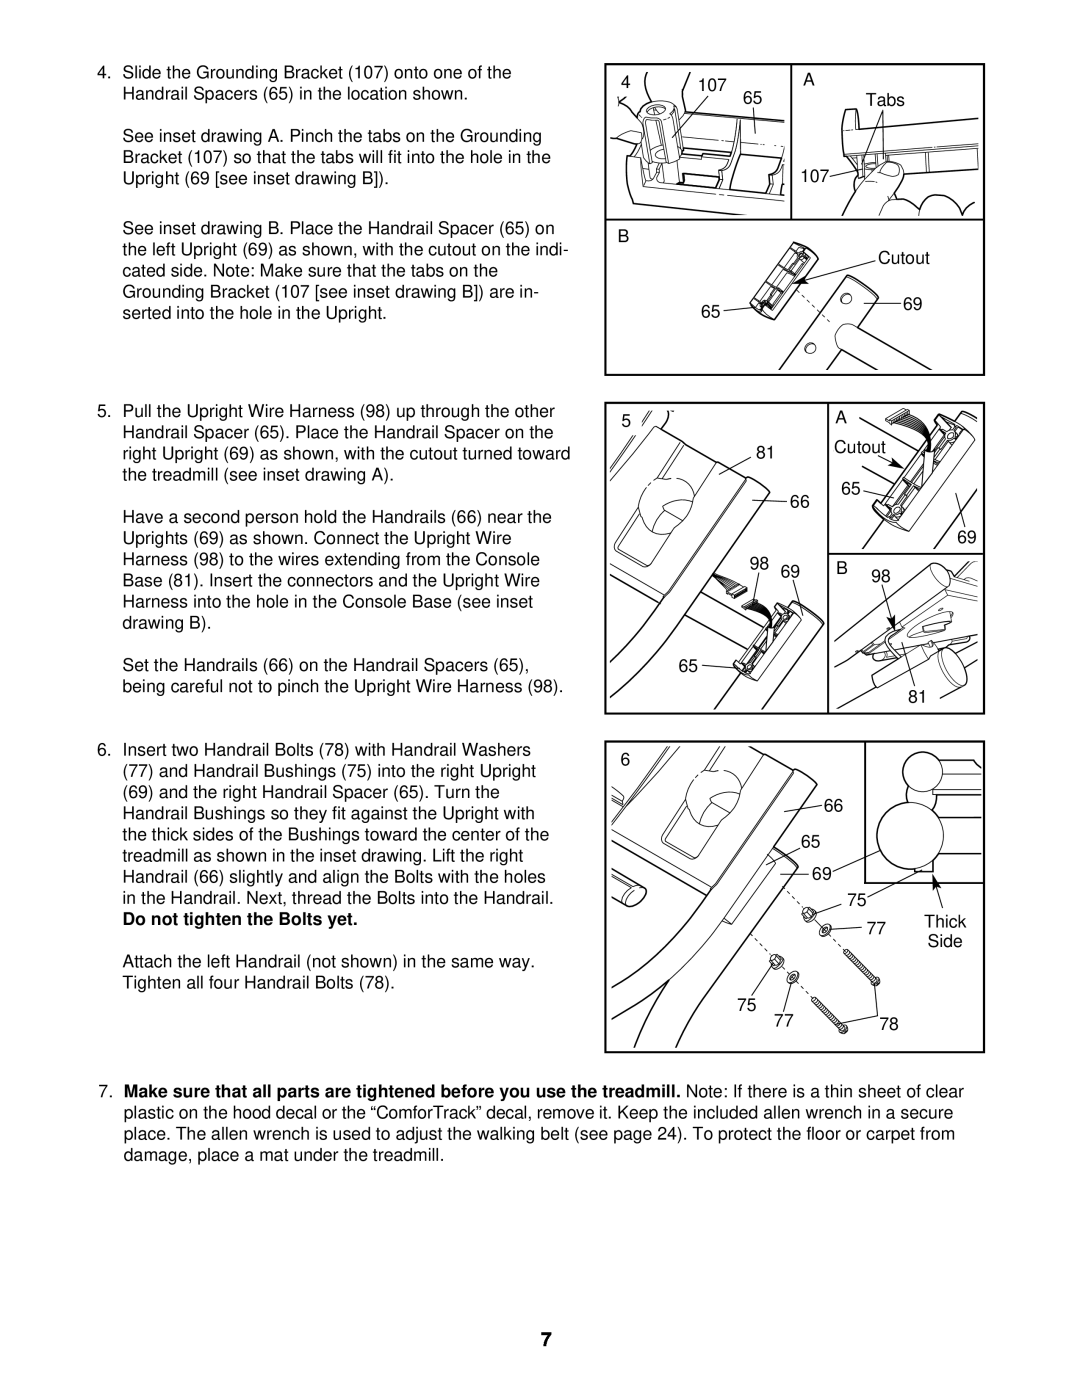 NordicTrack NTTL09610 user manual Do not tighten the Bolts yet 